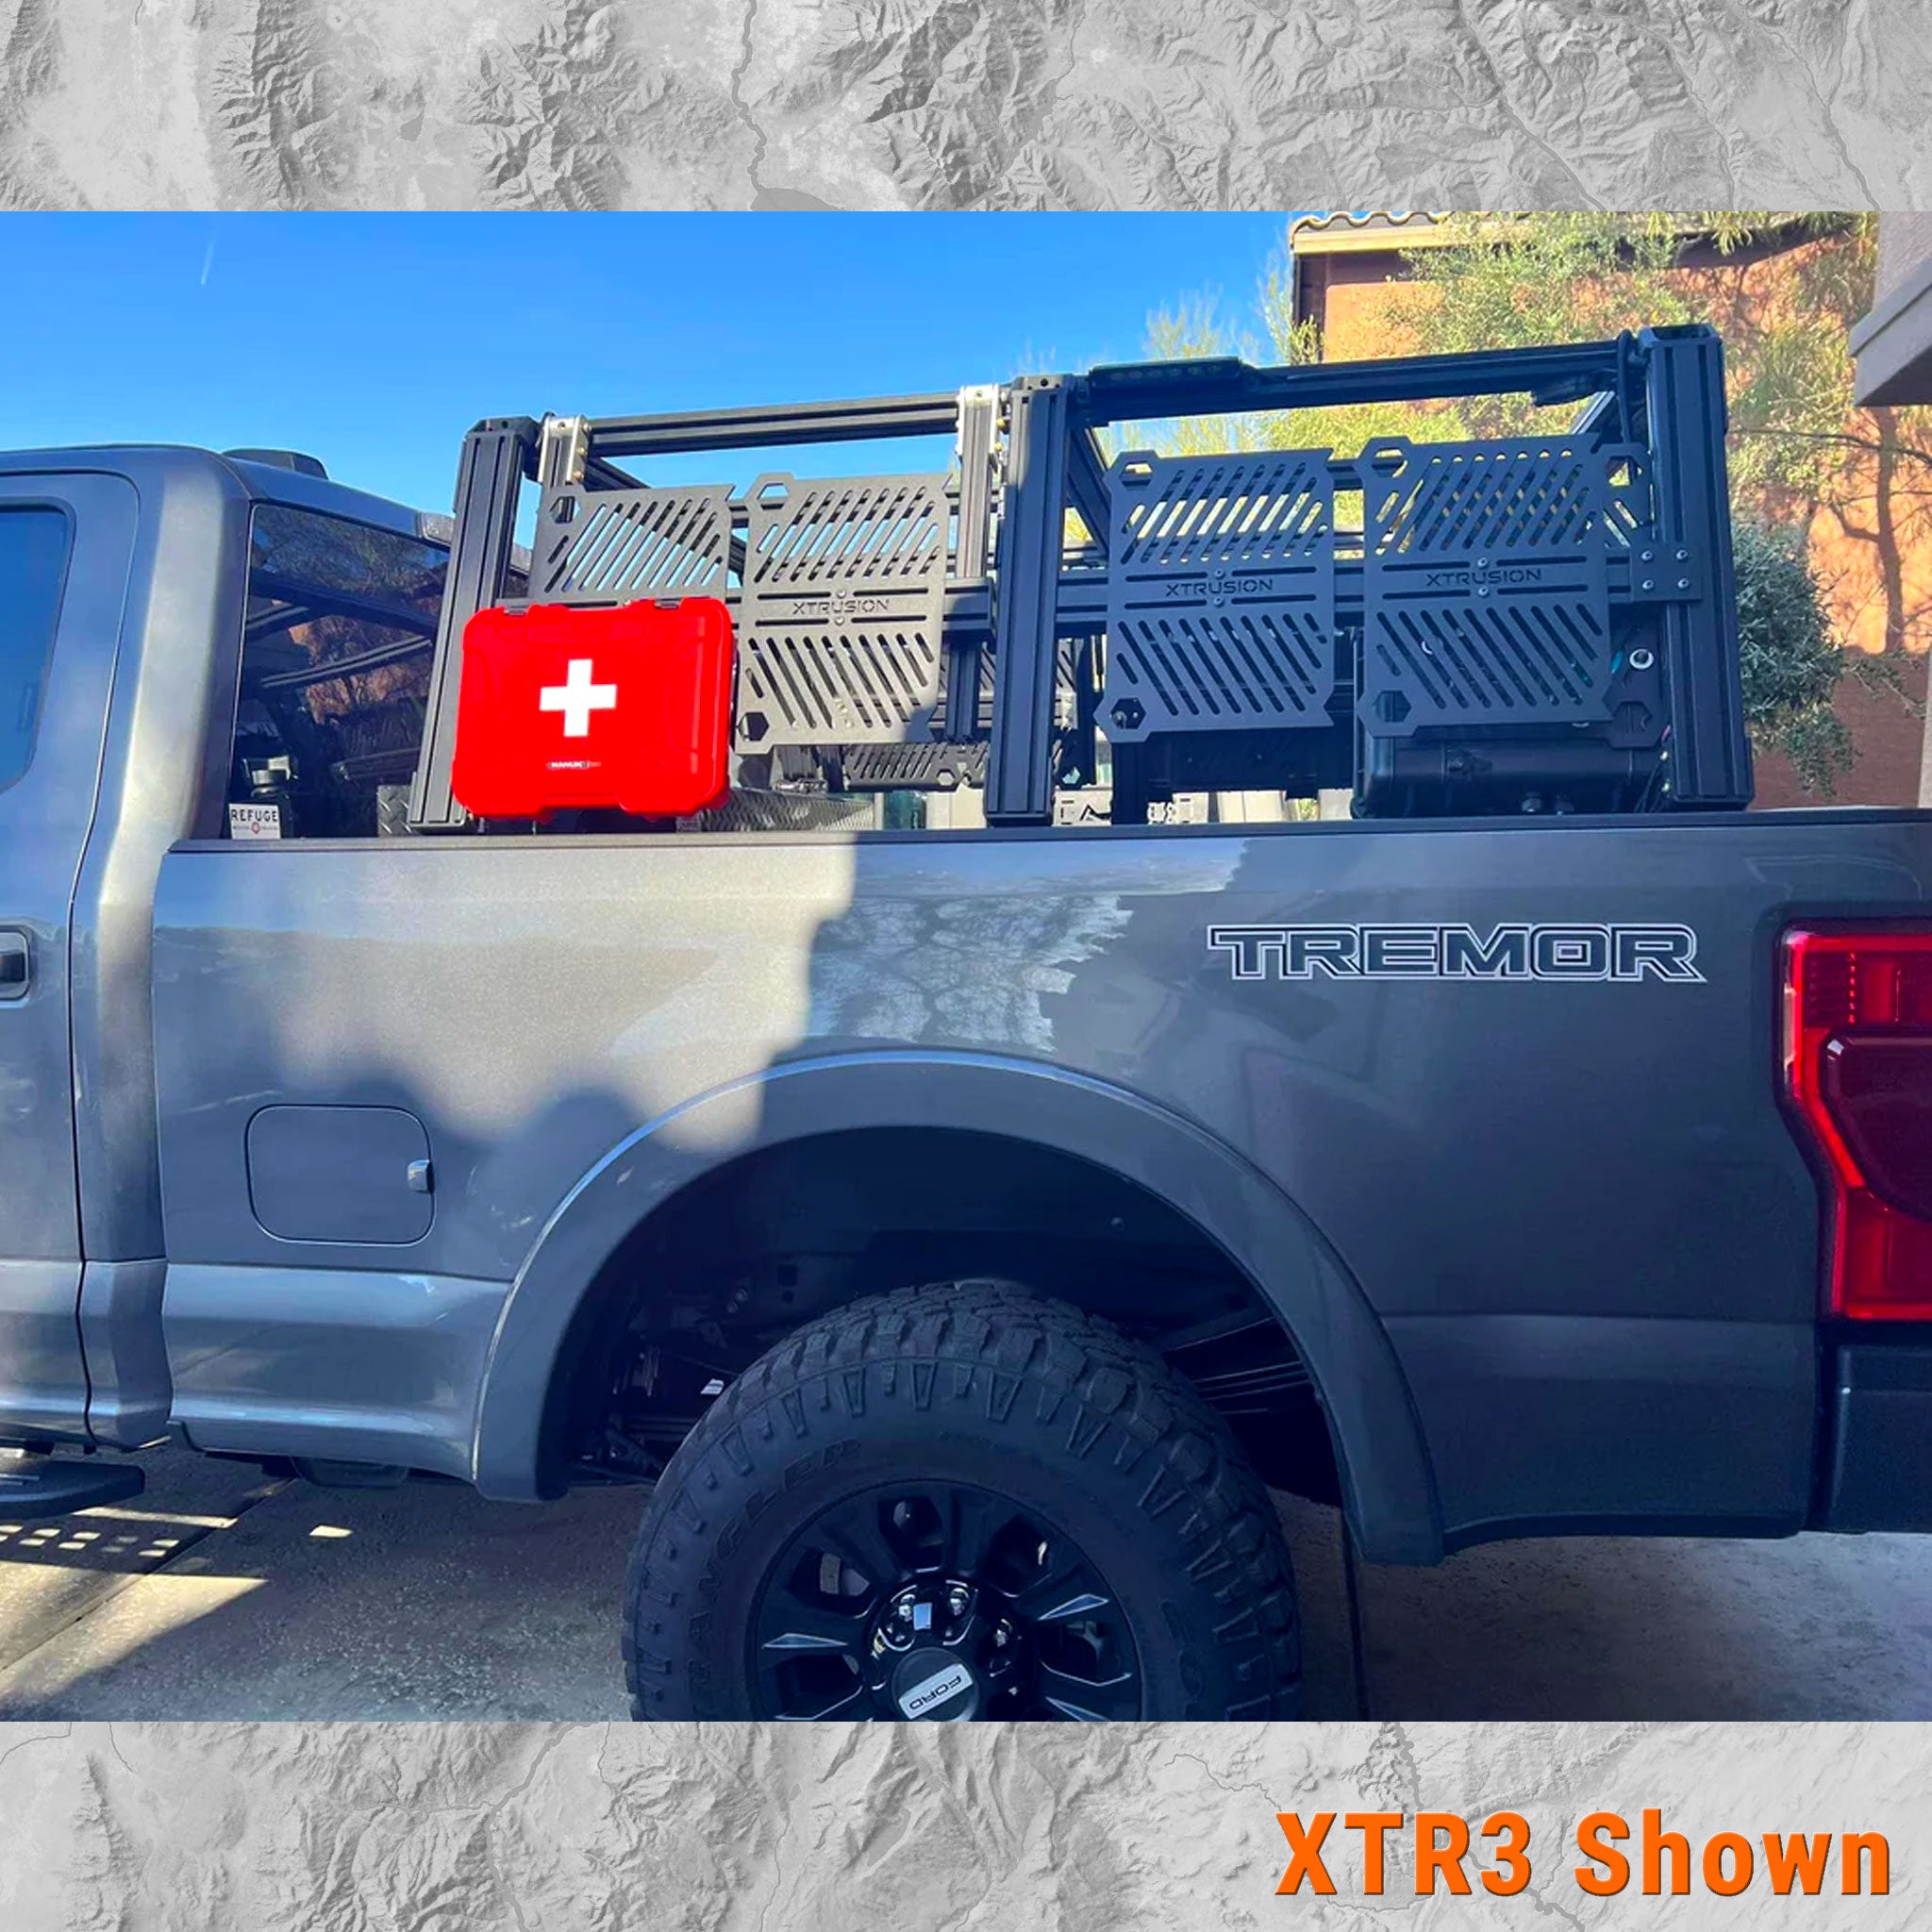 Ford F250 Superduty Tremor shown with XTR3 bed rack and mole panels with mounted first aid kit